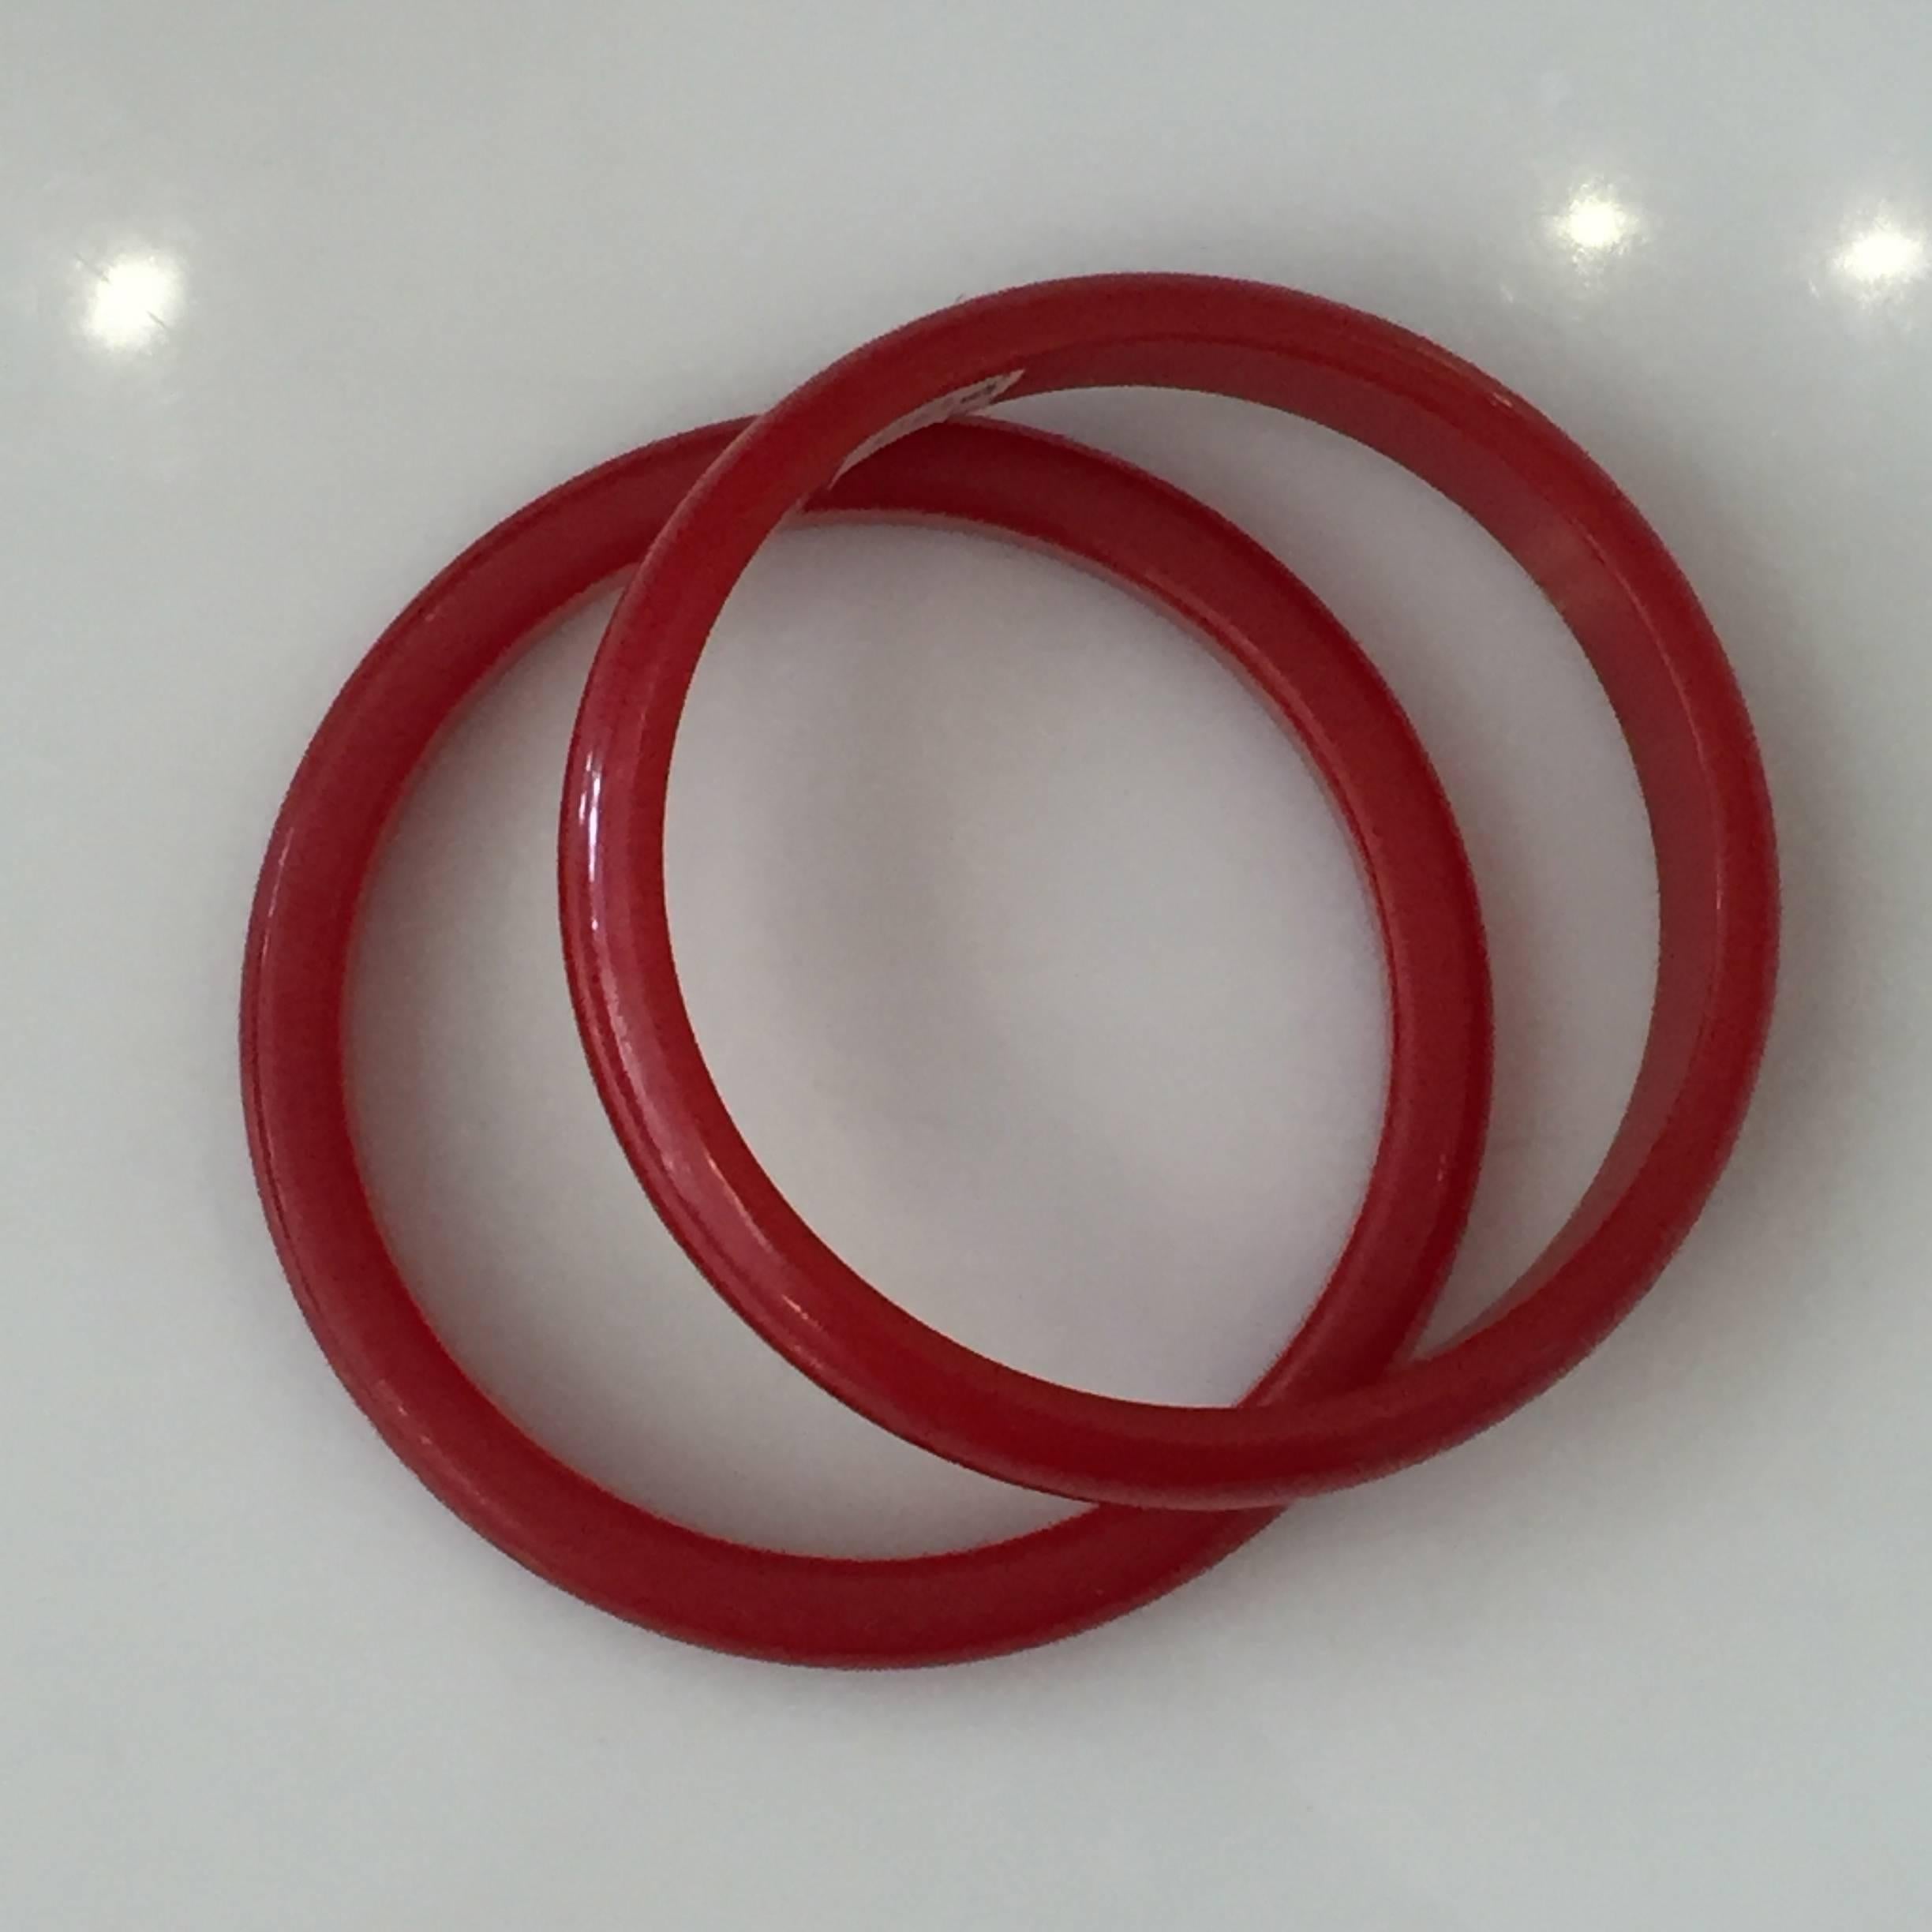 Set of two brightly colored cherry red bakelite bangles bracelets. 

2 3/8